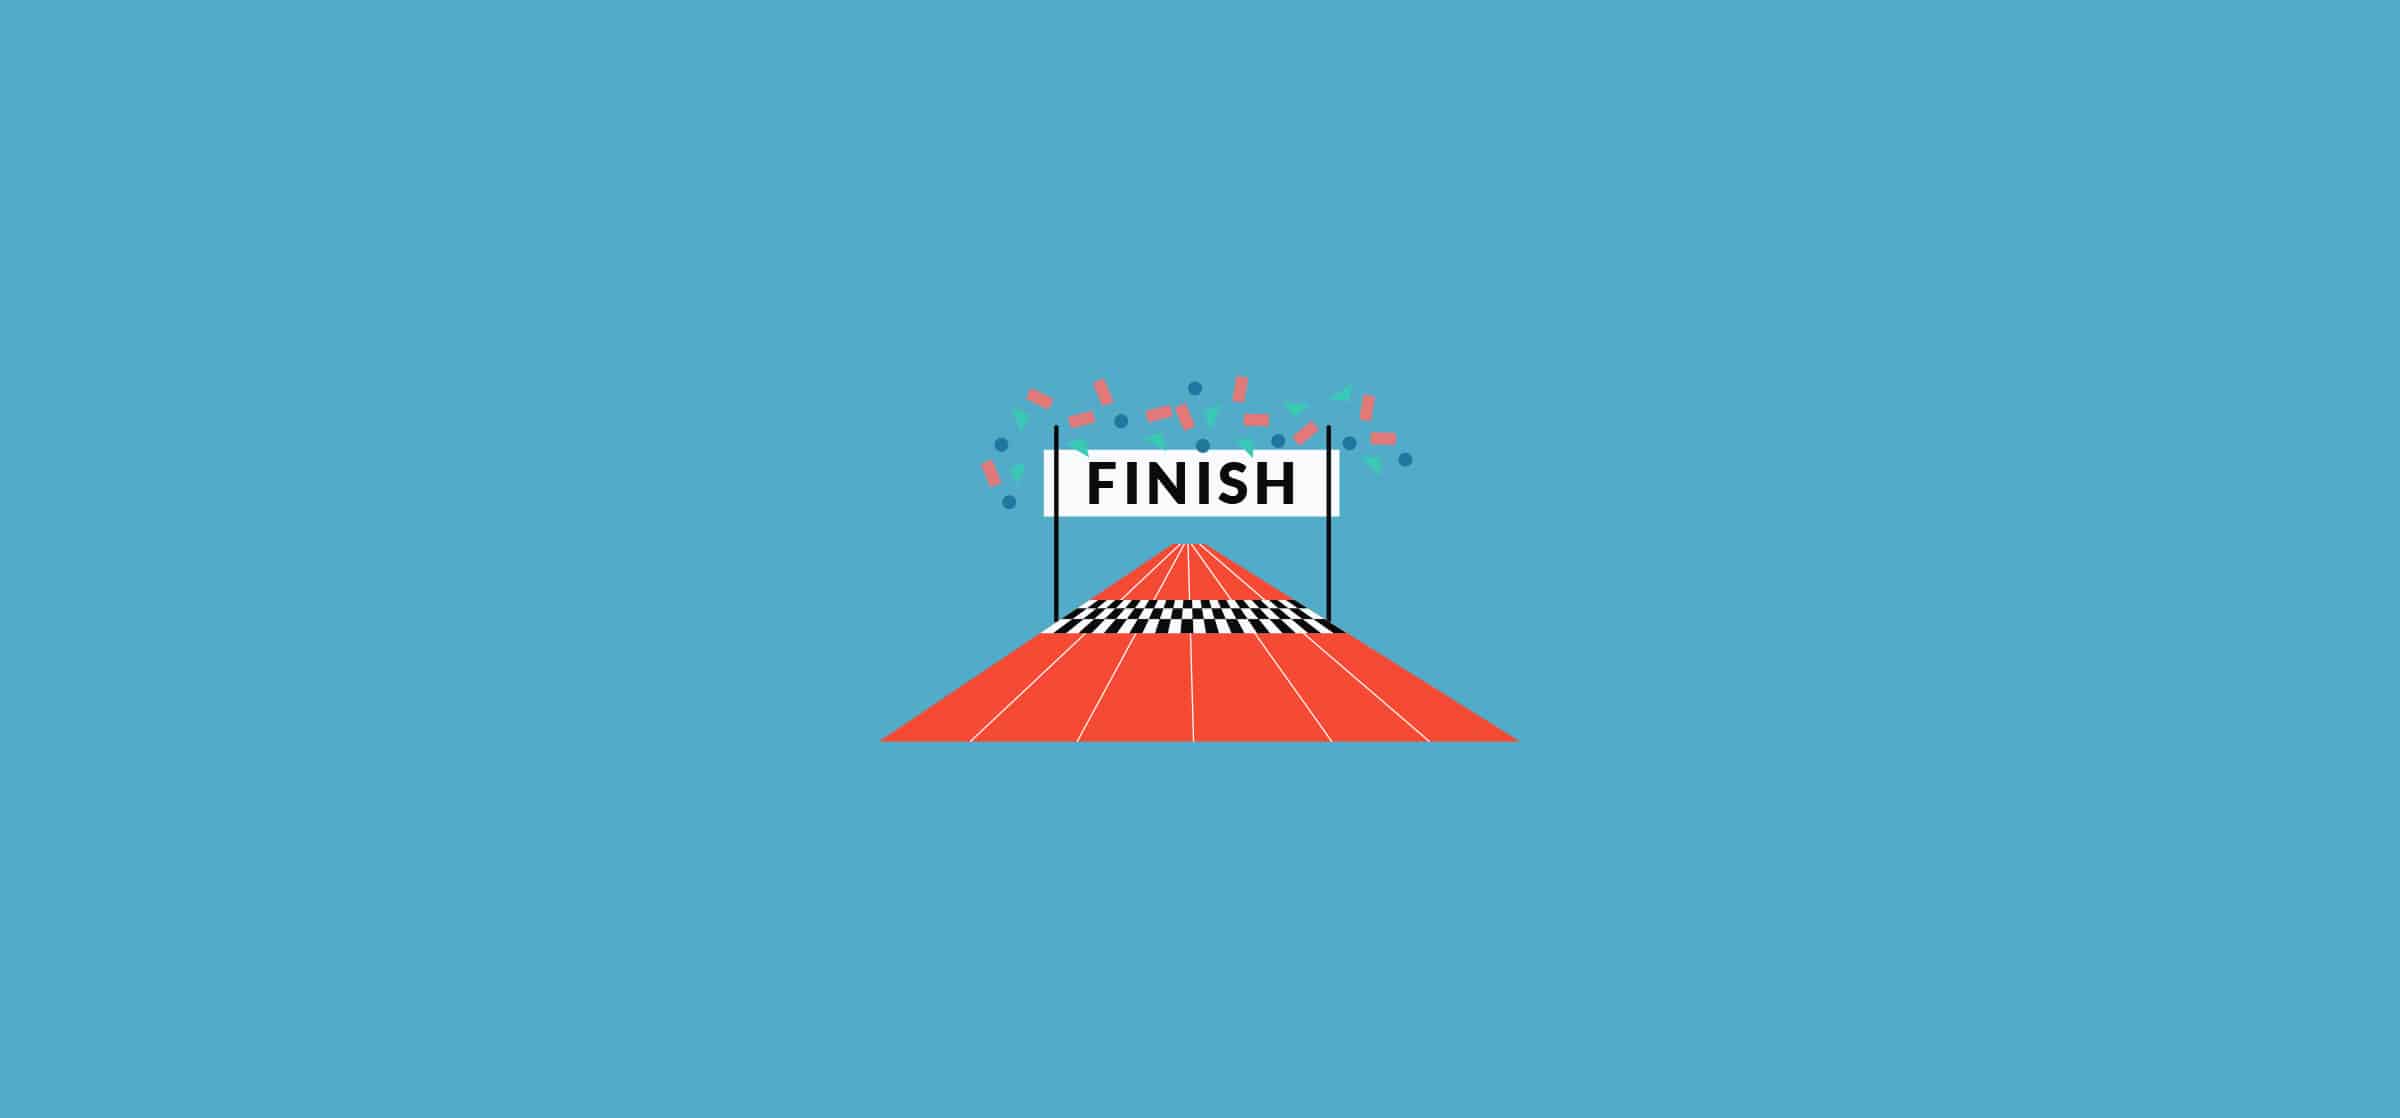 An illustration of the finish line at a foot race, representing the sprint execution workflow.